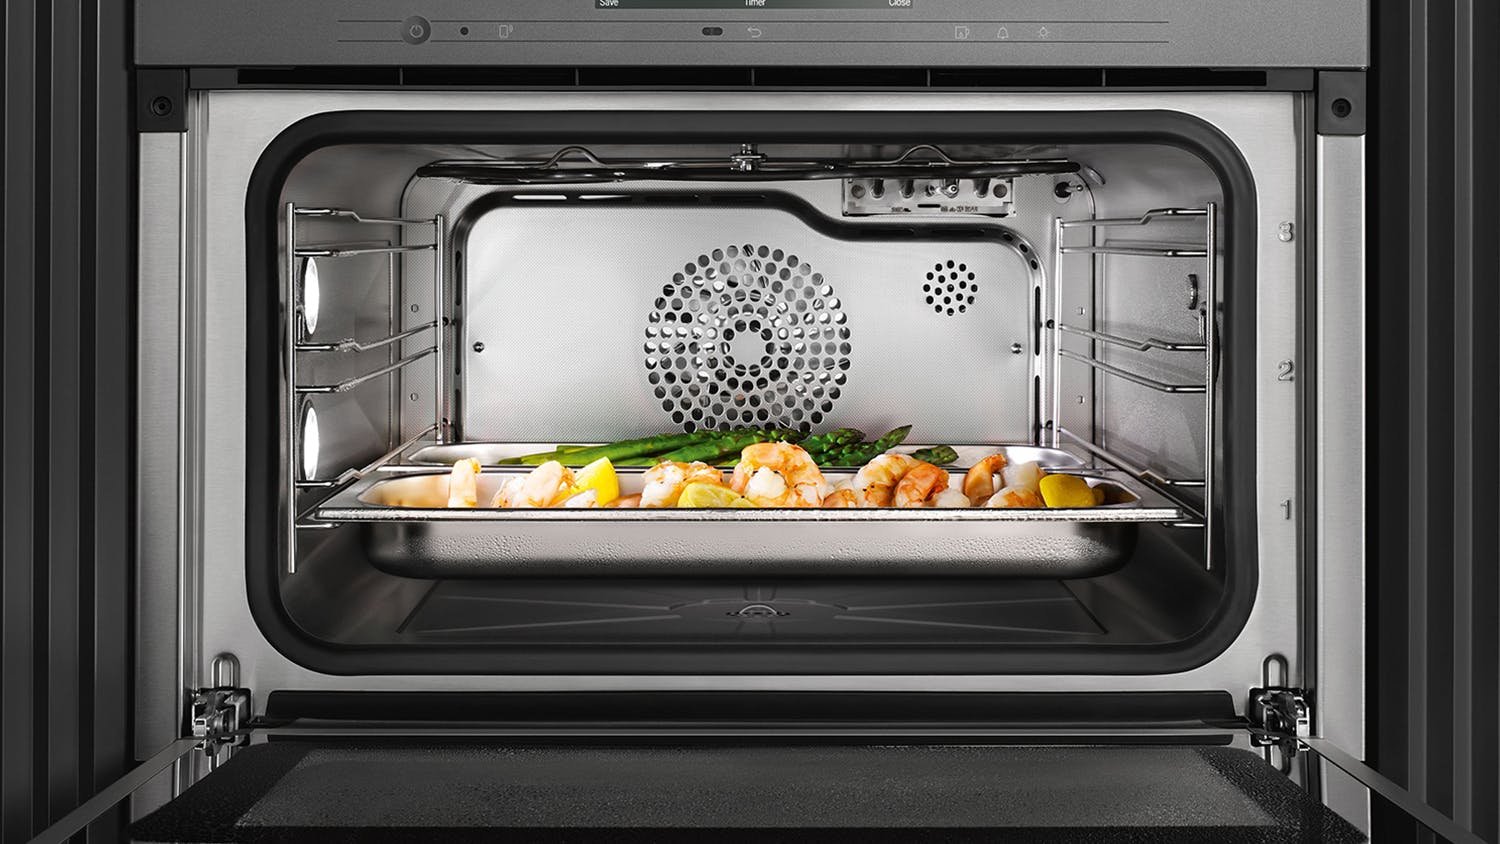 Miele 45cm 14 Function Built-In Compact Steam Oven - Graphite Grey (DGC 7440 HCX Pro/12087340)